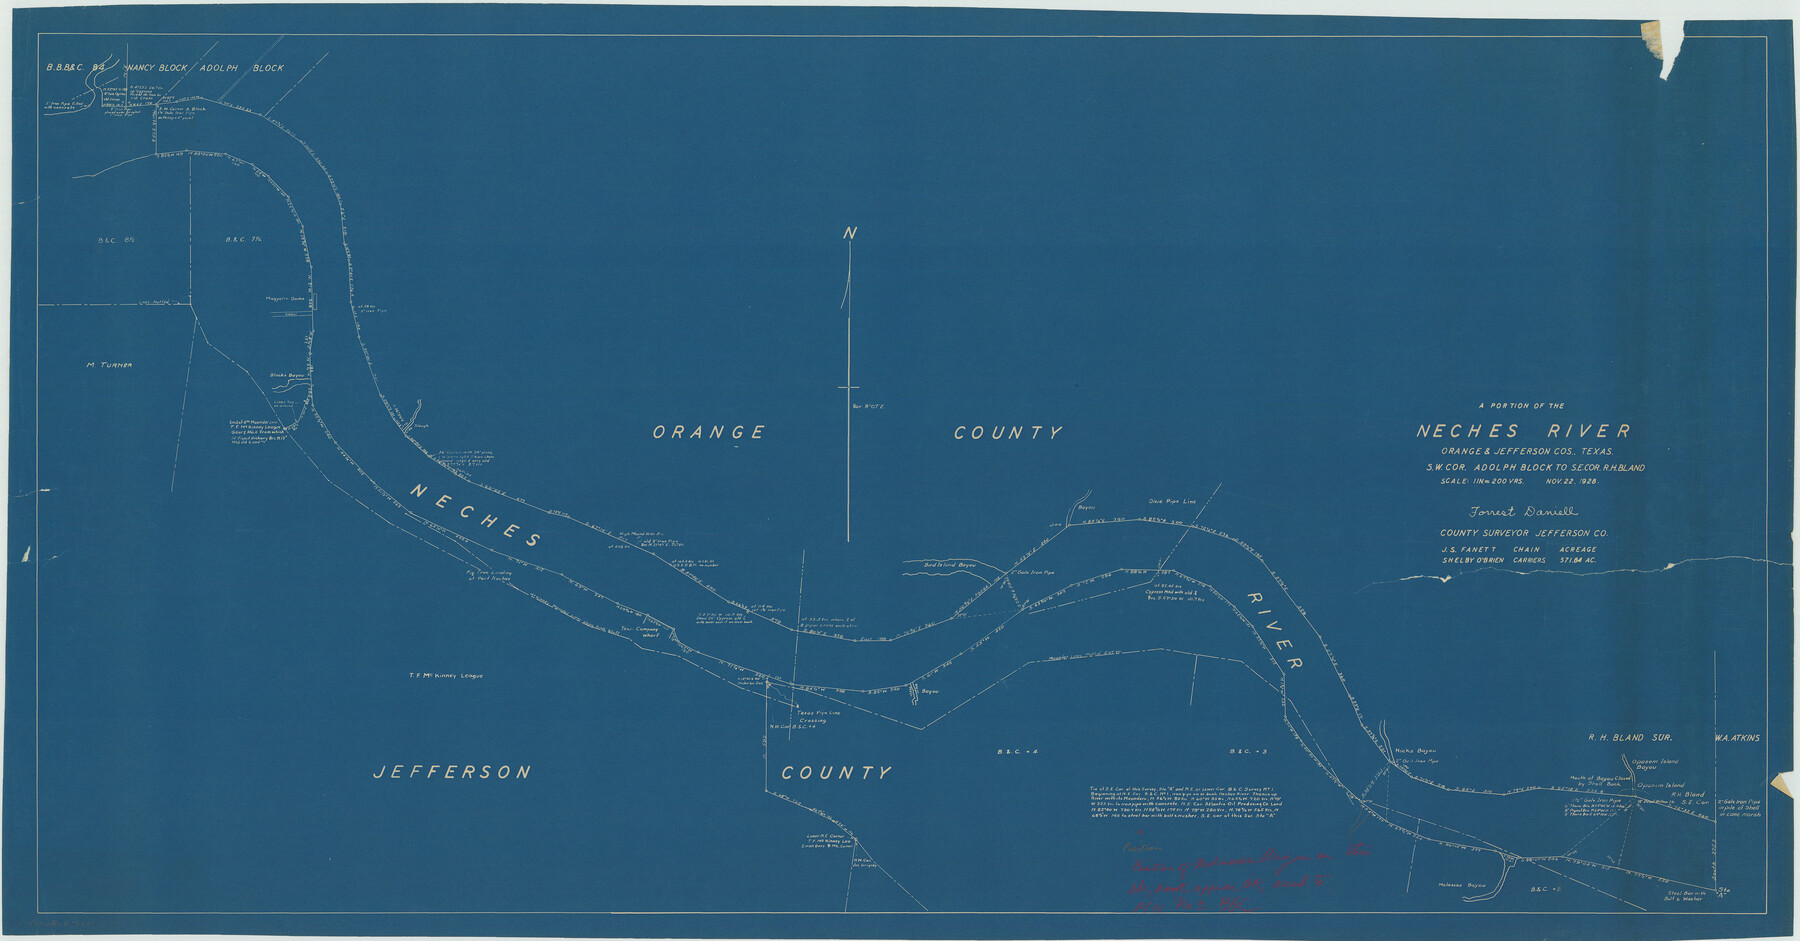 65667, [Sketch for Mineral Application 14125 - Neches River, R. B. Moore], General Map Collection